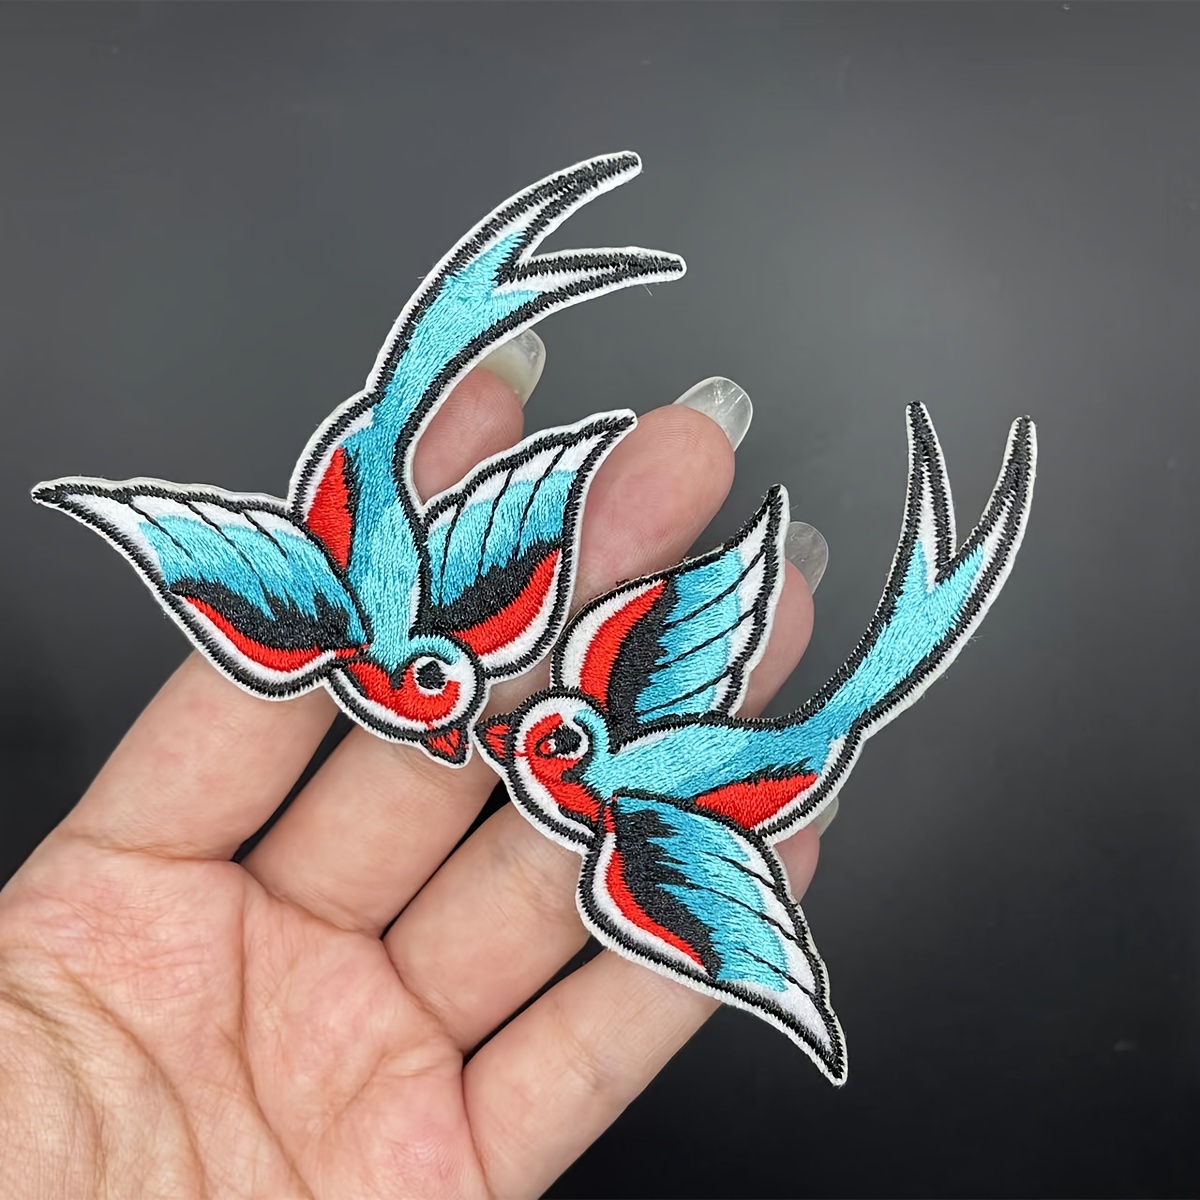 

2pcs Swallow Patches, Embroidery Appliques, Iron On Patches For Jackets, Sew On Patches For Clothing, Backpacks, Jeans, T-shirt